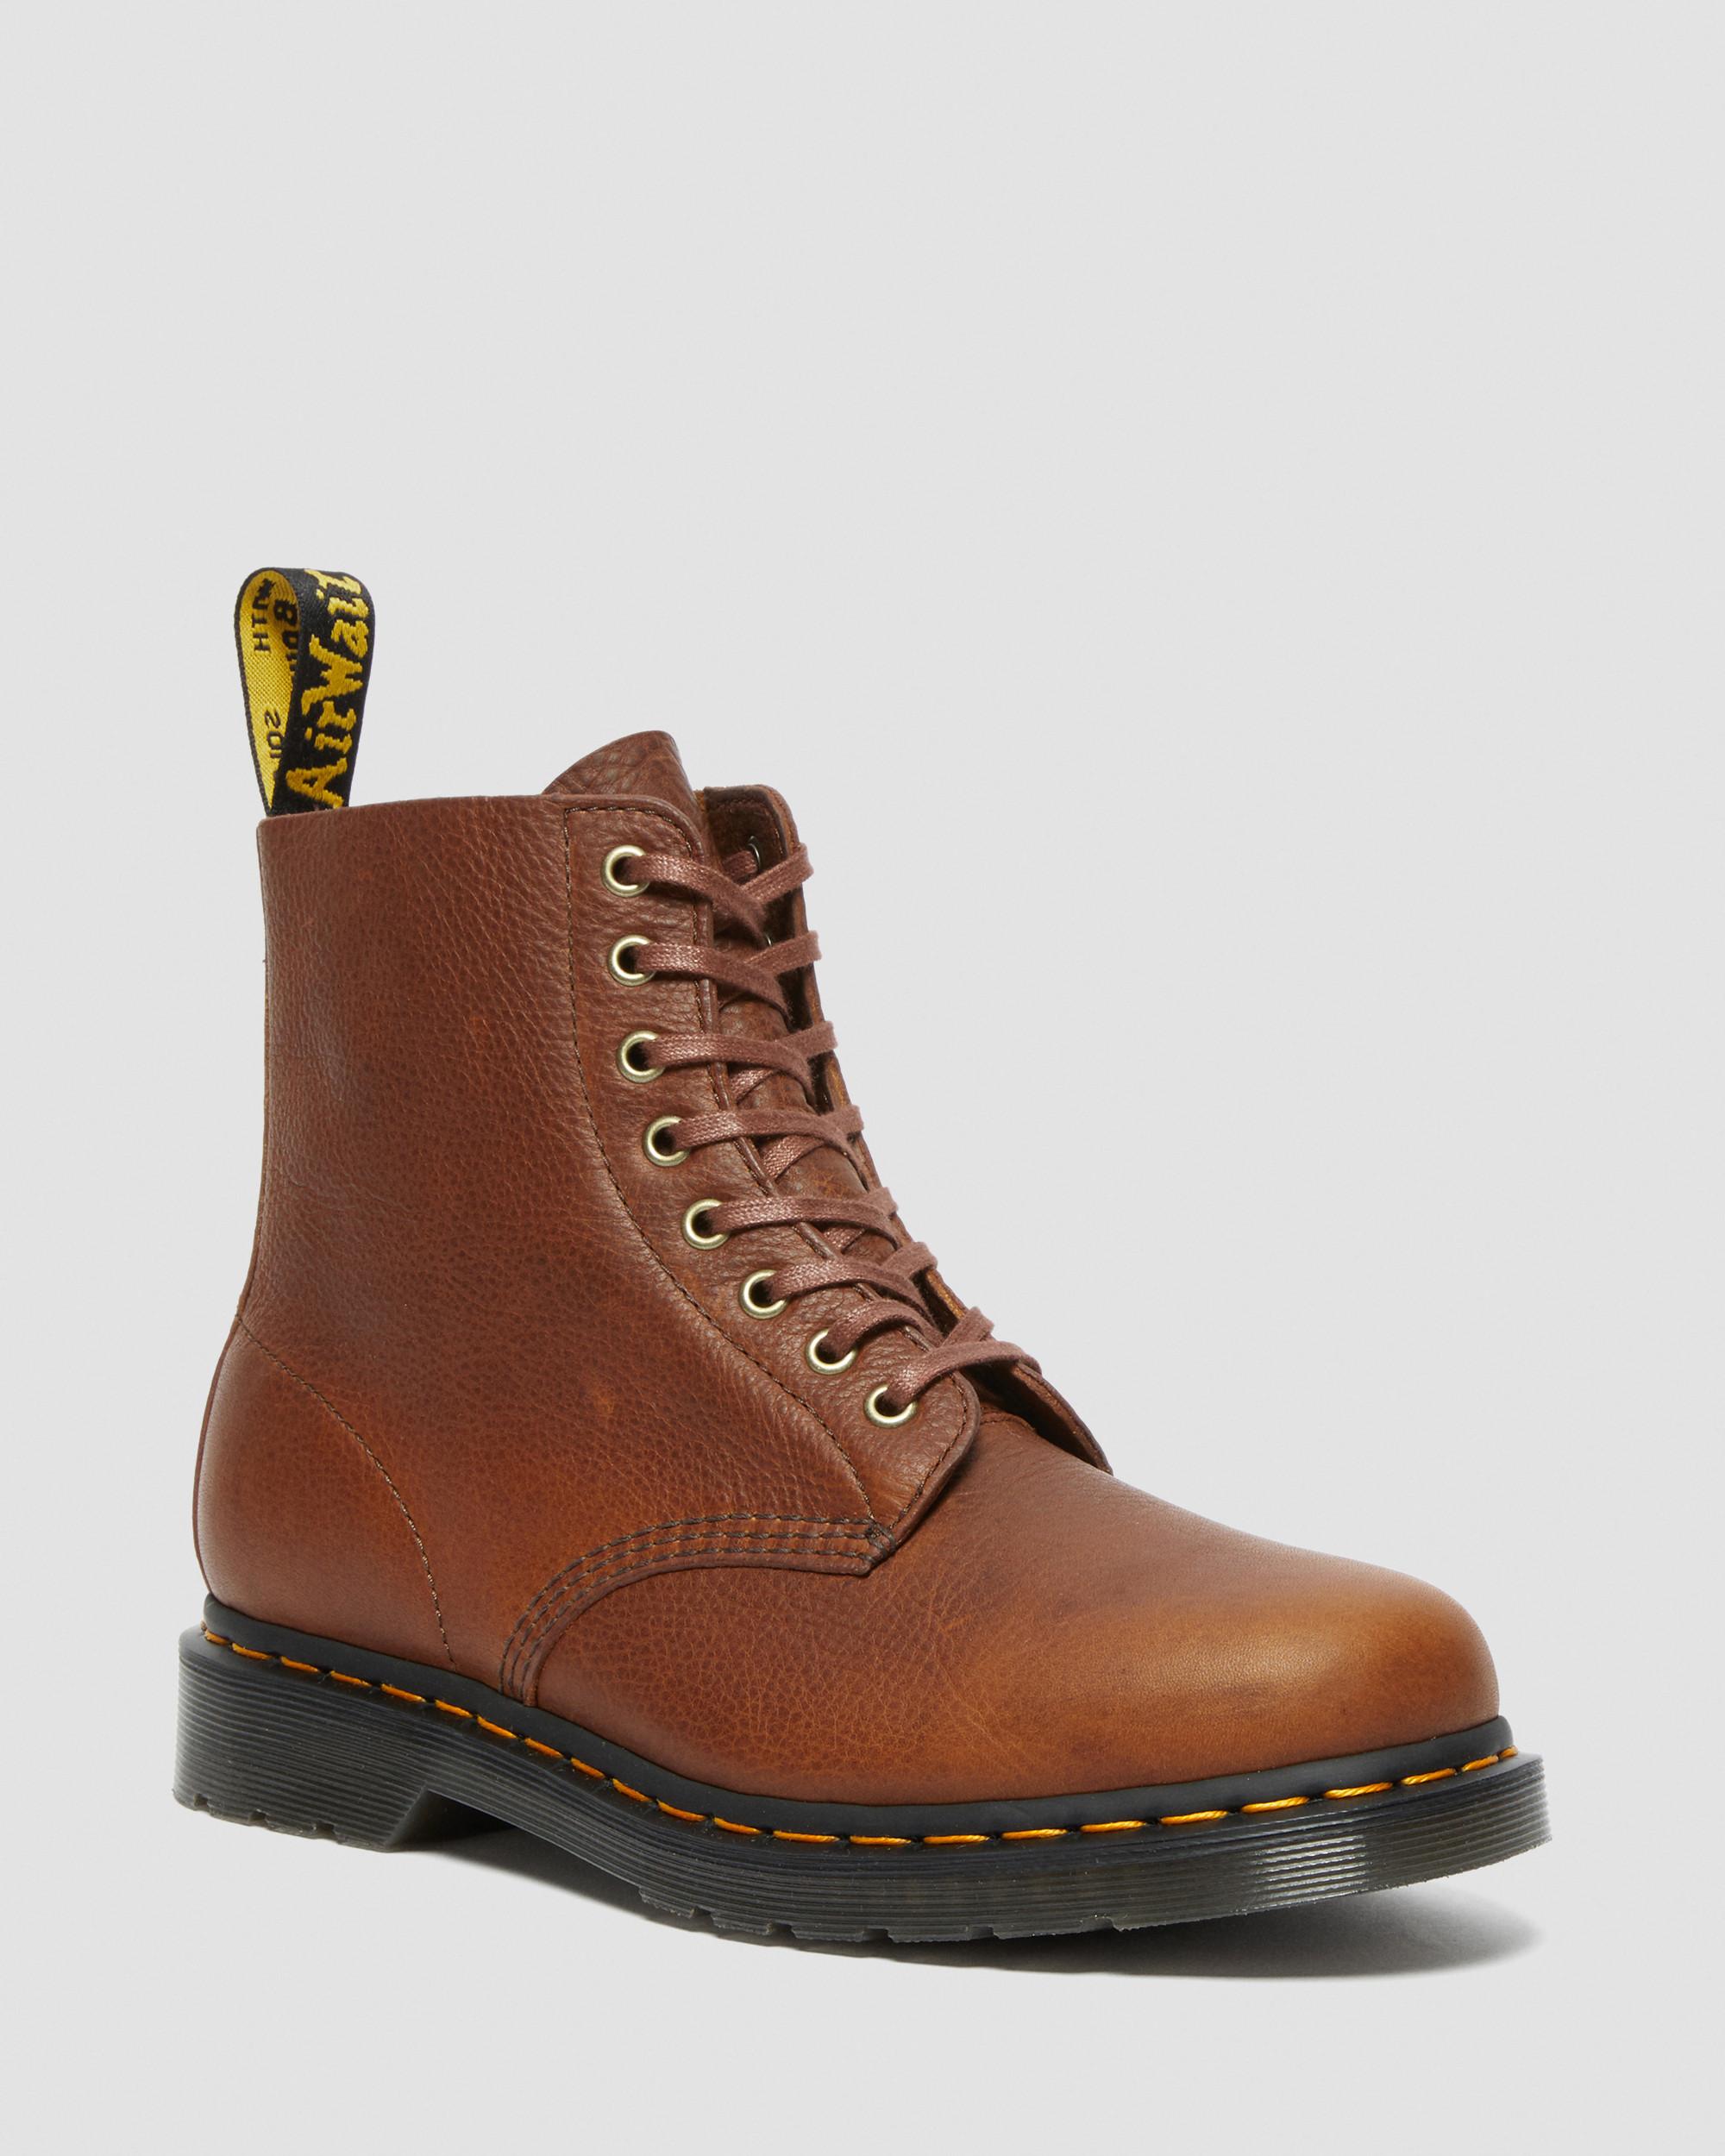 1460 Pascal Ambassador Leather Lace Up Boots in Cashew | Dr. Martens